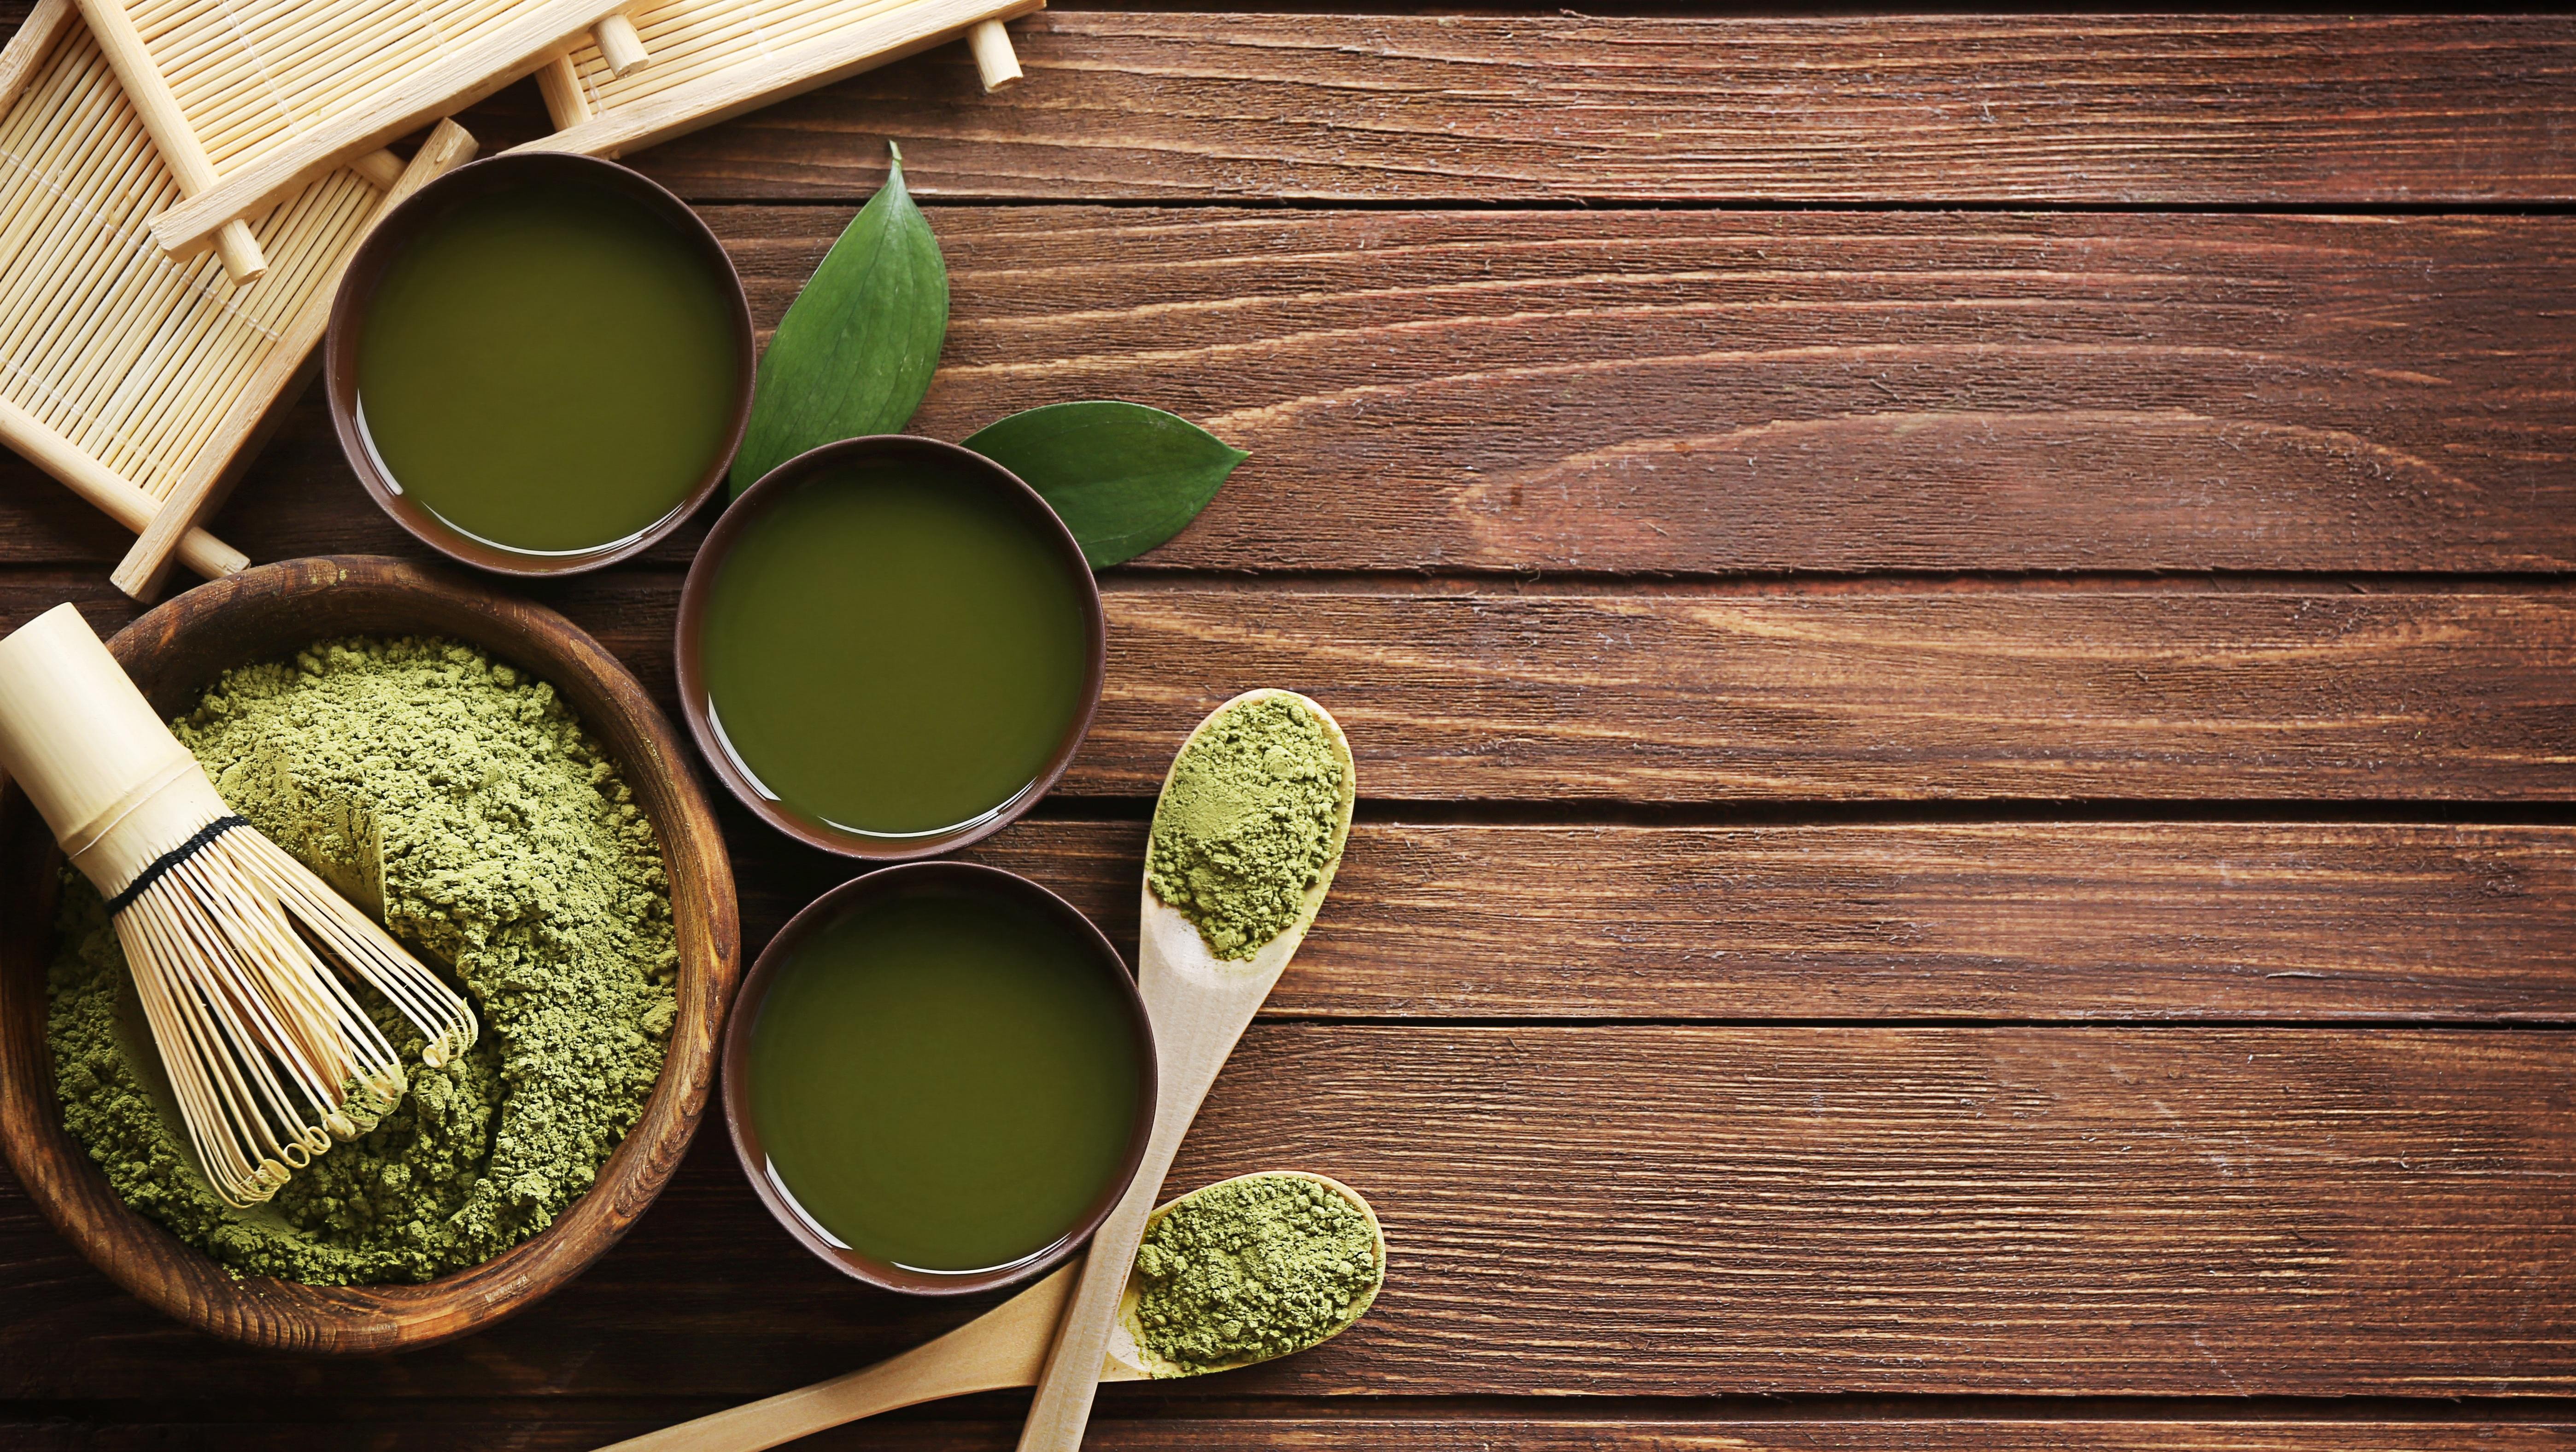 Green Tea Extract Can Be Terrible For Your Liver